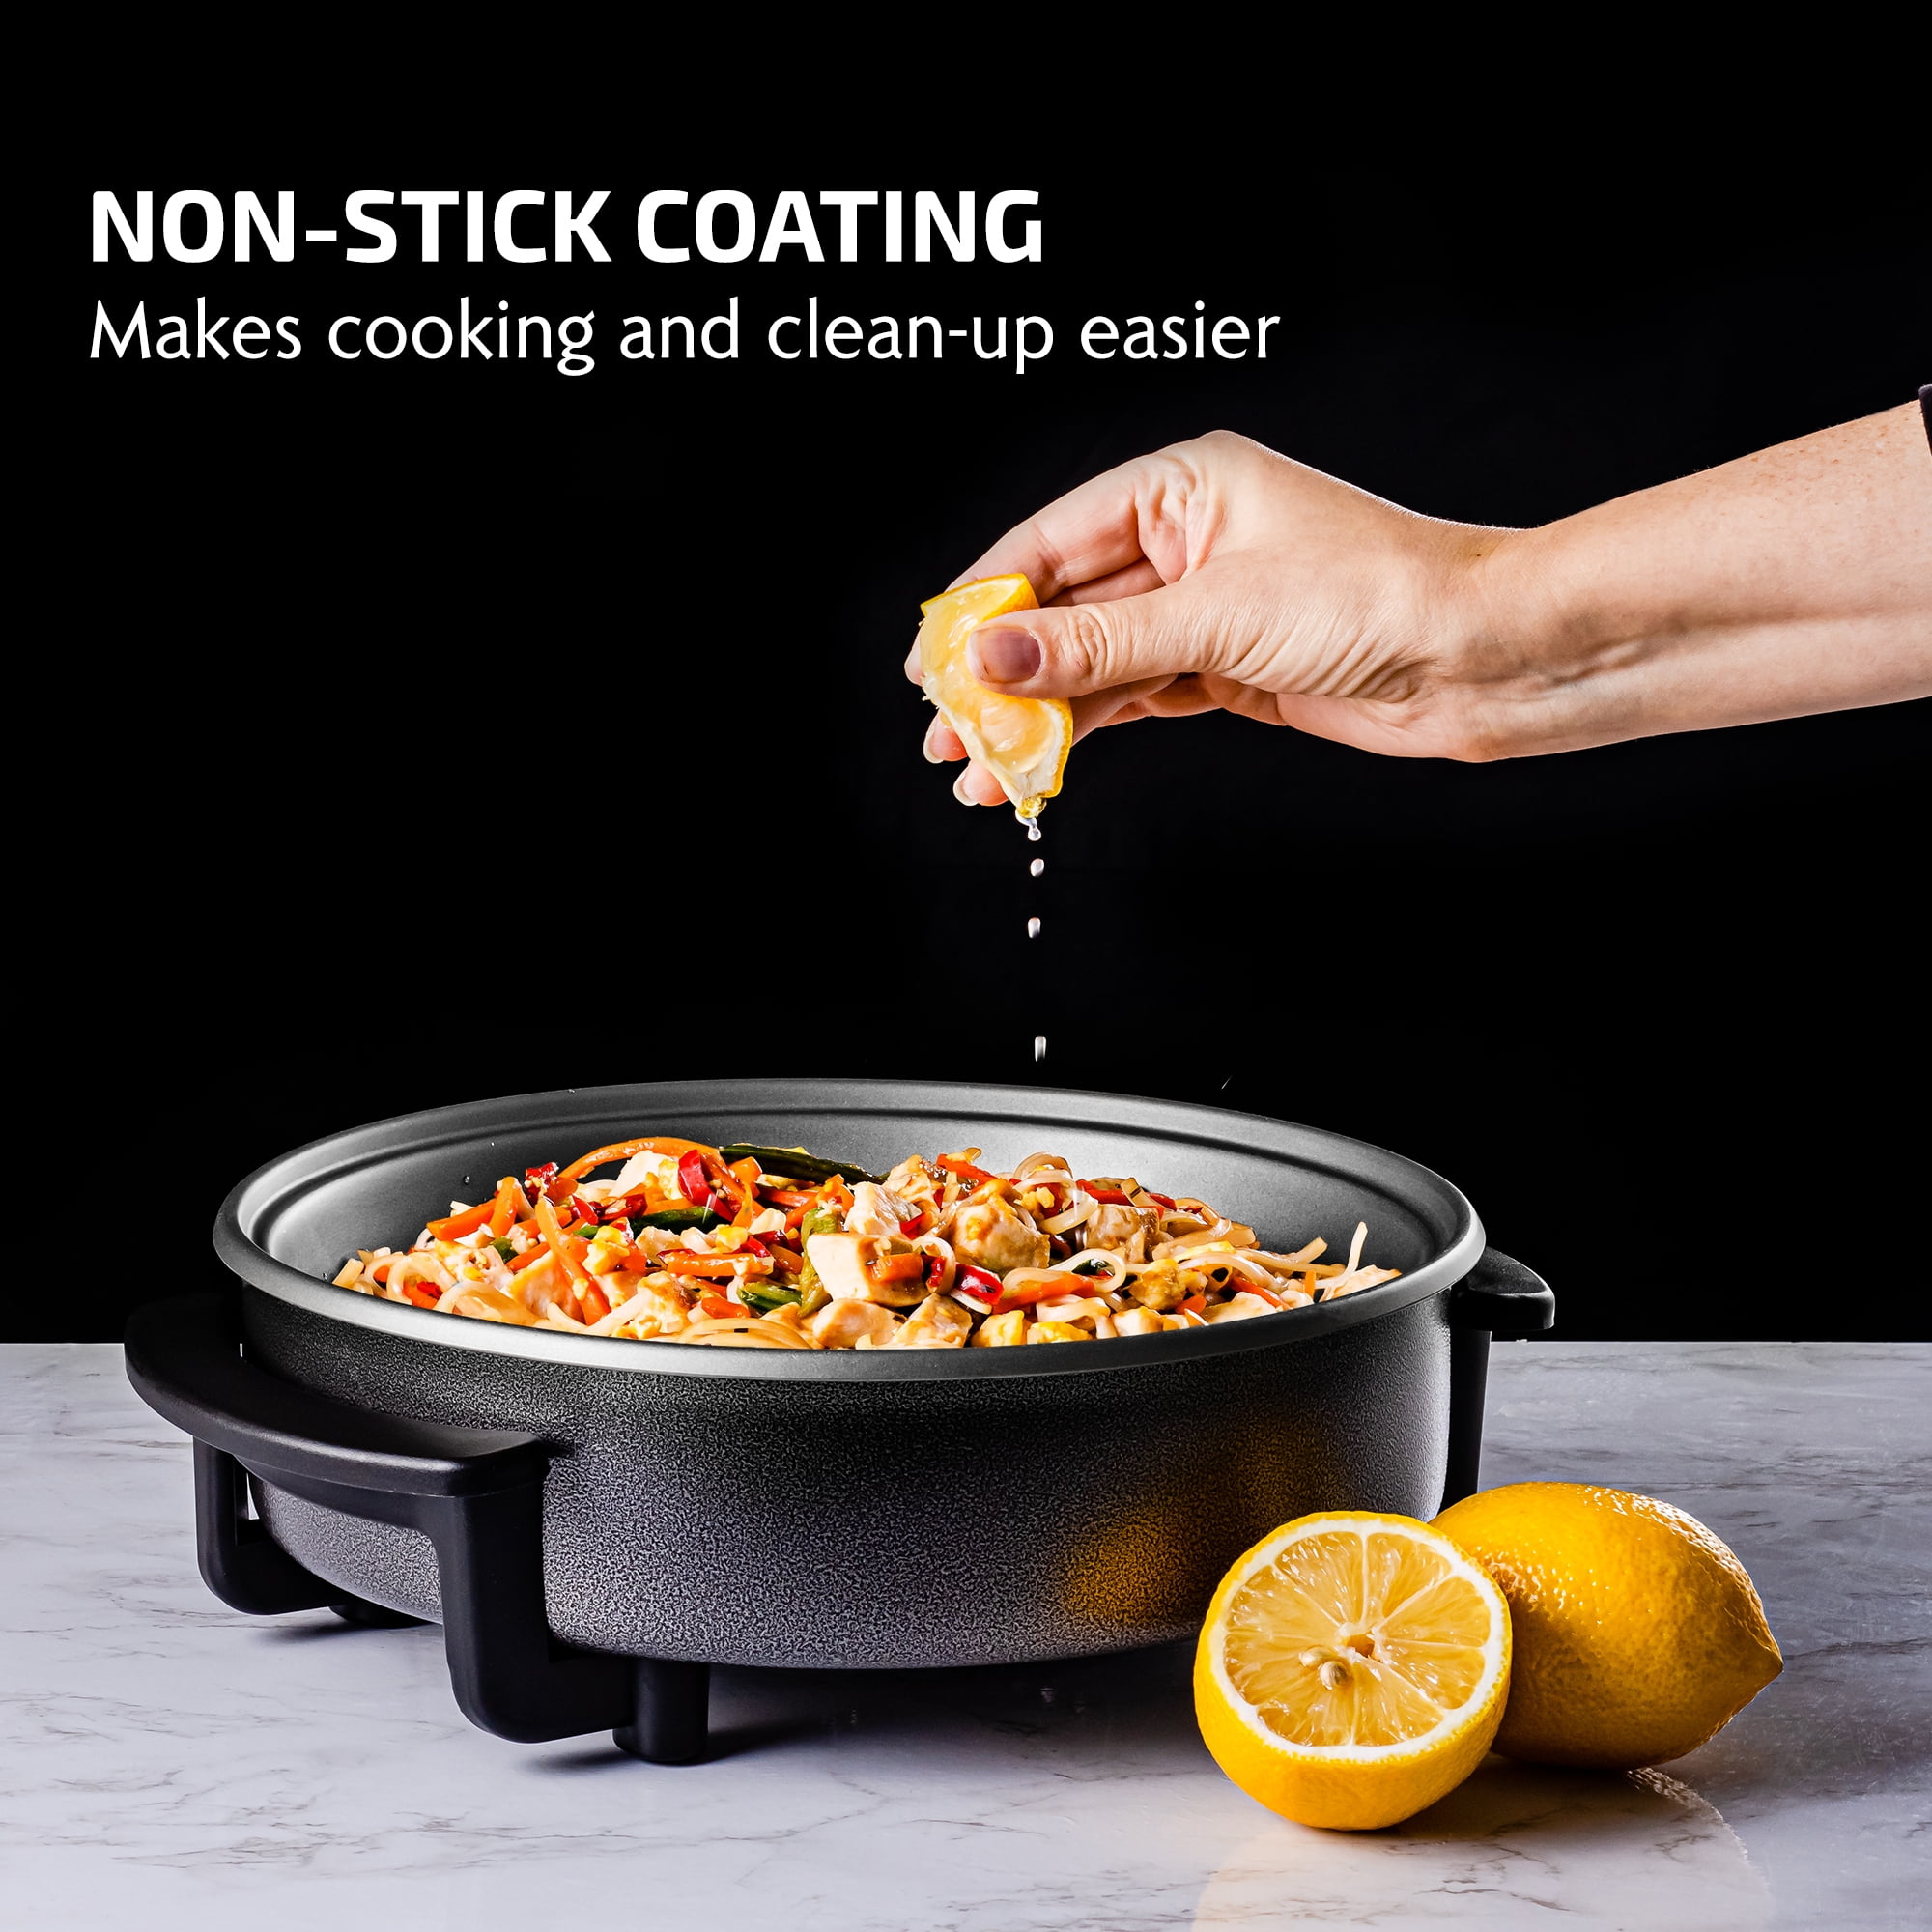 Ovente Electric Skillet 12 inch with Nonstick Aluminum Body Black SK11112B